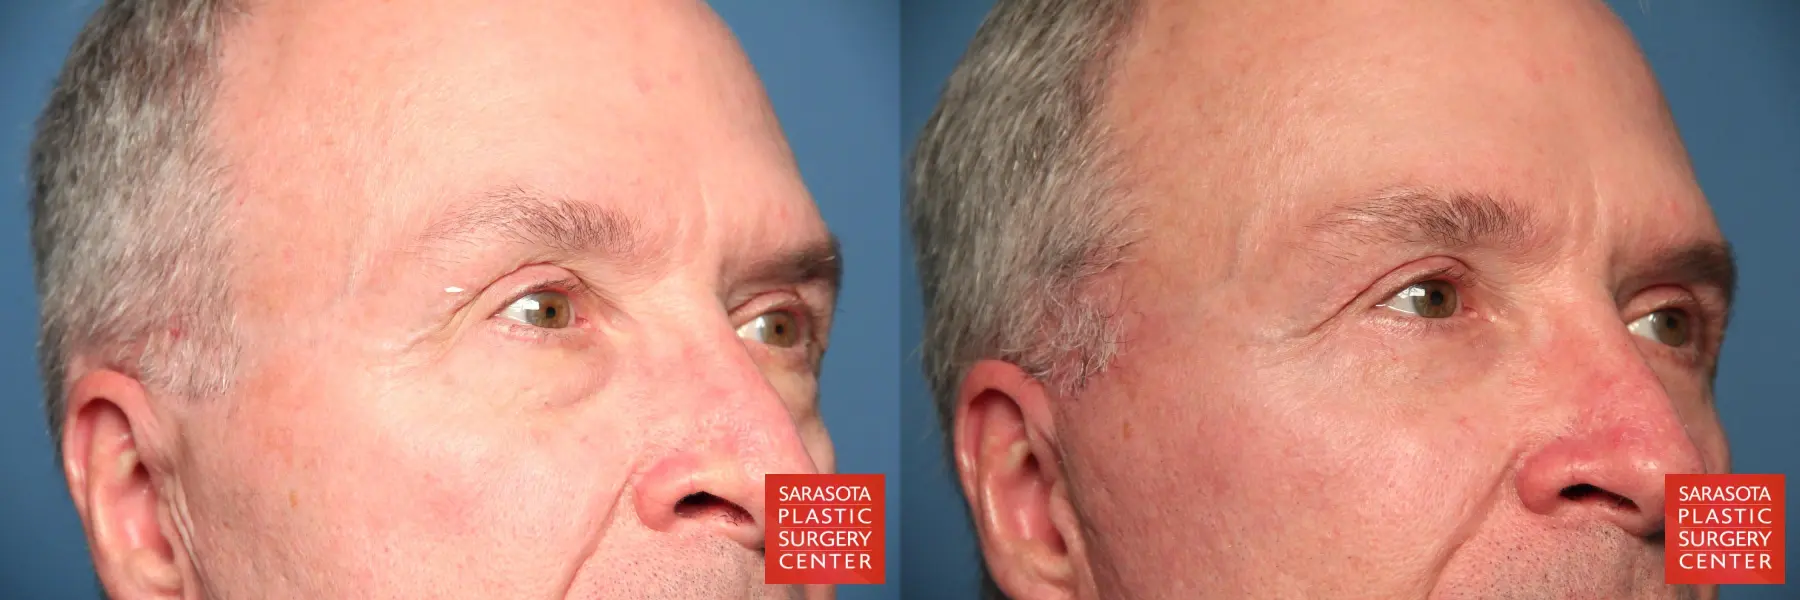 Eyelid Lift For Men: Patient 2 - Before and After 5